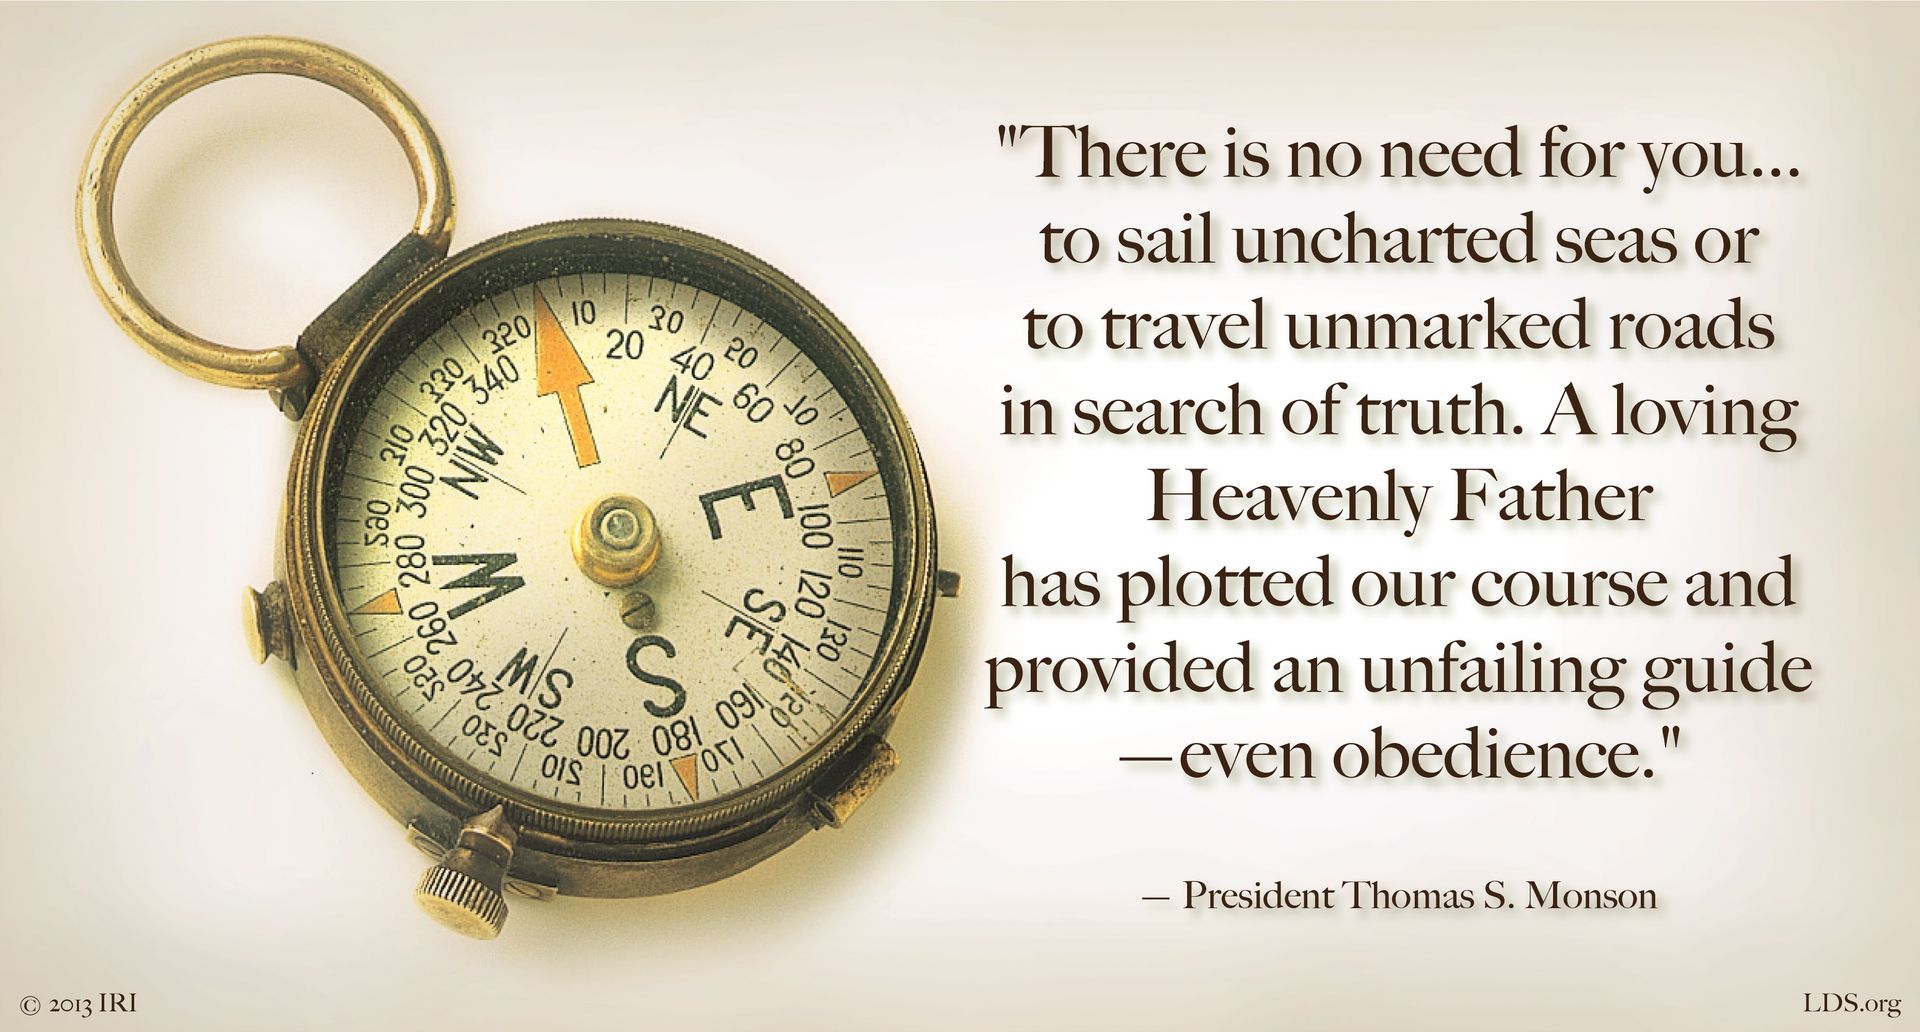 “There is no need for you … to sail uncharted seas or to travel unmarked roads in search of truth. A loving Heavenly Father has plotted our course and provided an unfailing guide—even obedience.”—President Thomas S. Monson, “Obedience Brings Blessings” © undefined ipCode 1.